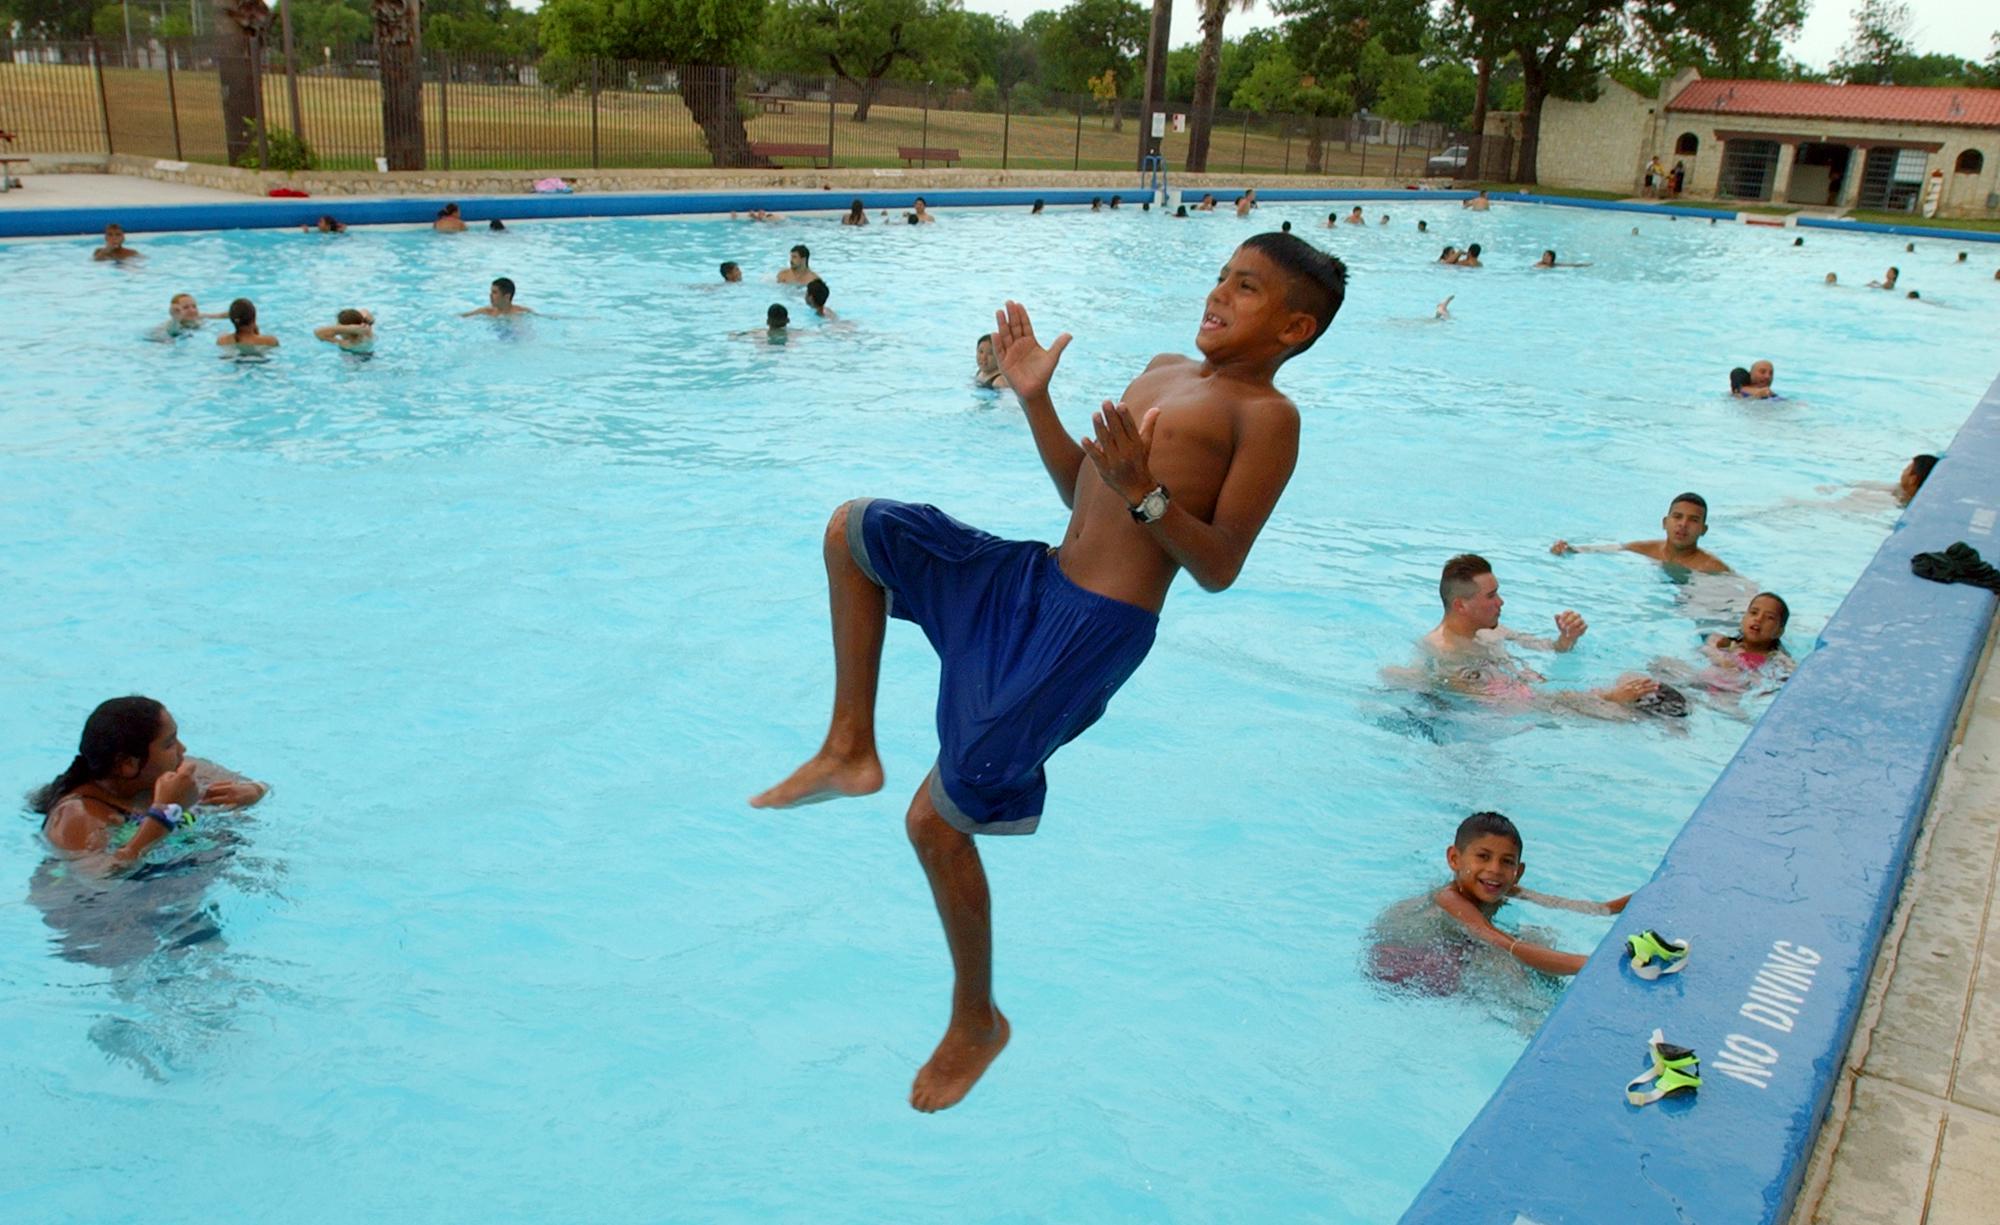 San Antonio’s historic public swimming pools reopen just in time for